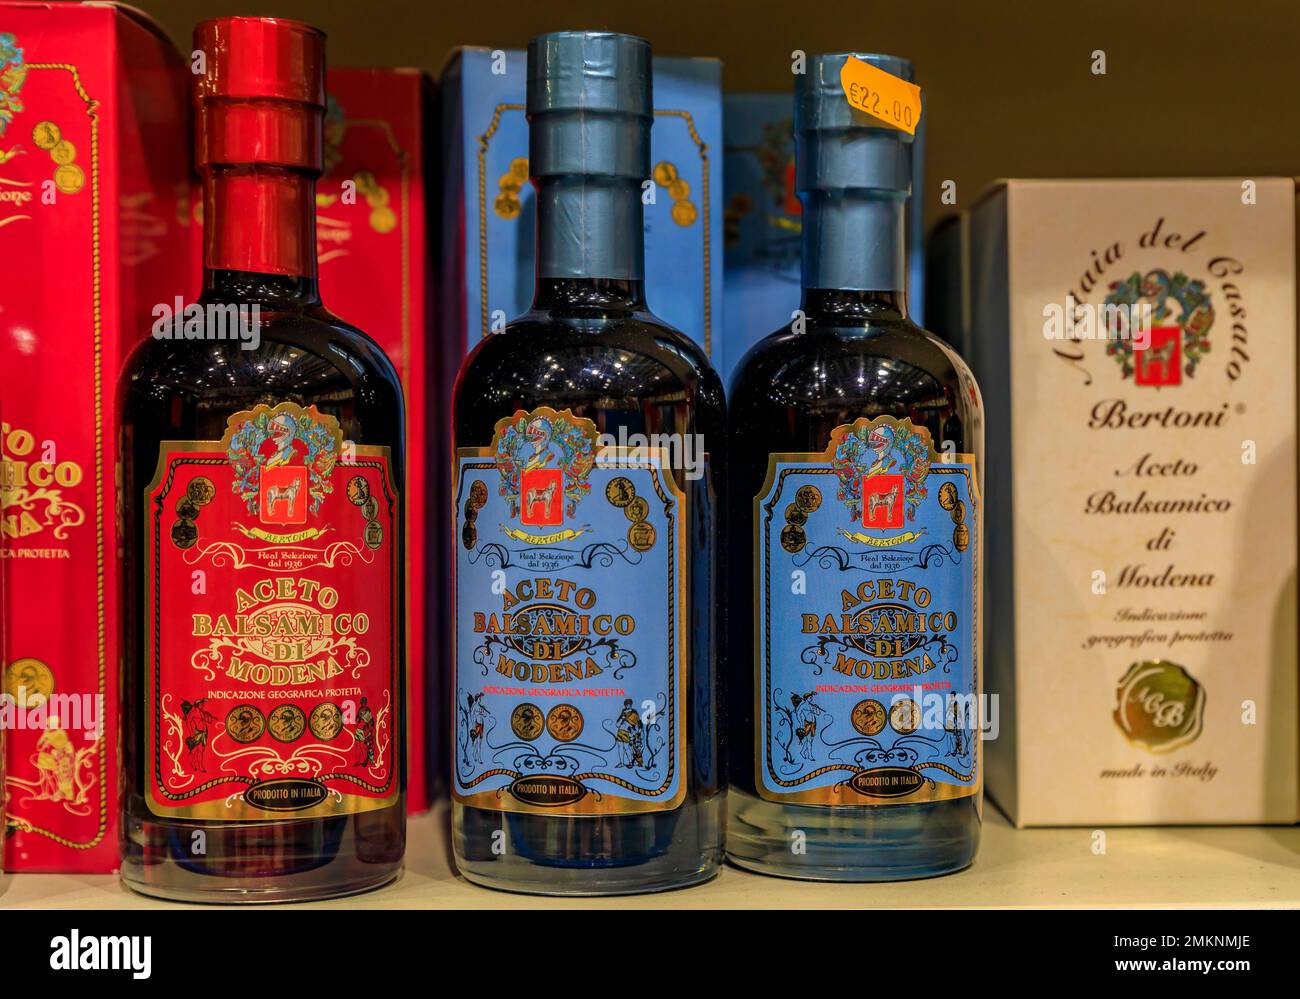 Florence, Italy - June 03, 2022: bottles of Bertoni balsamic vinegar from Modena aged from 4 to 8 years at a shop in Central Market Mercato Centrale Stock Photo